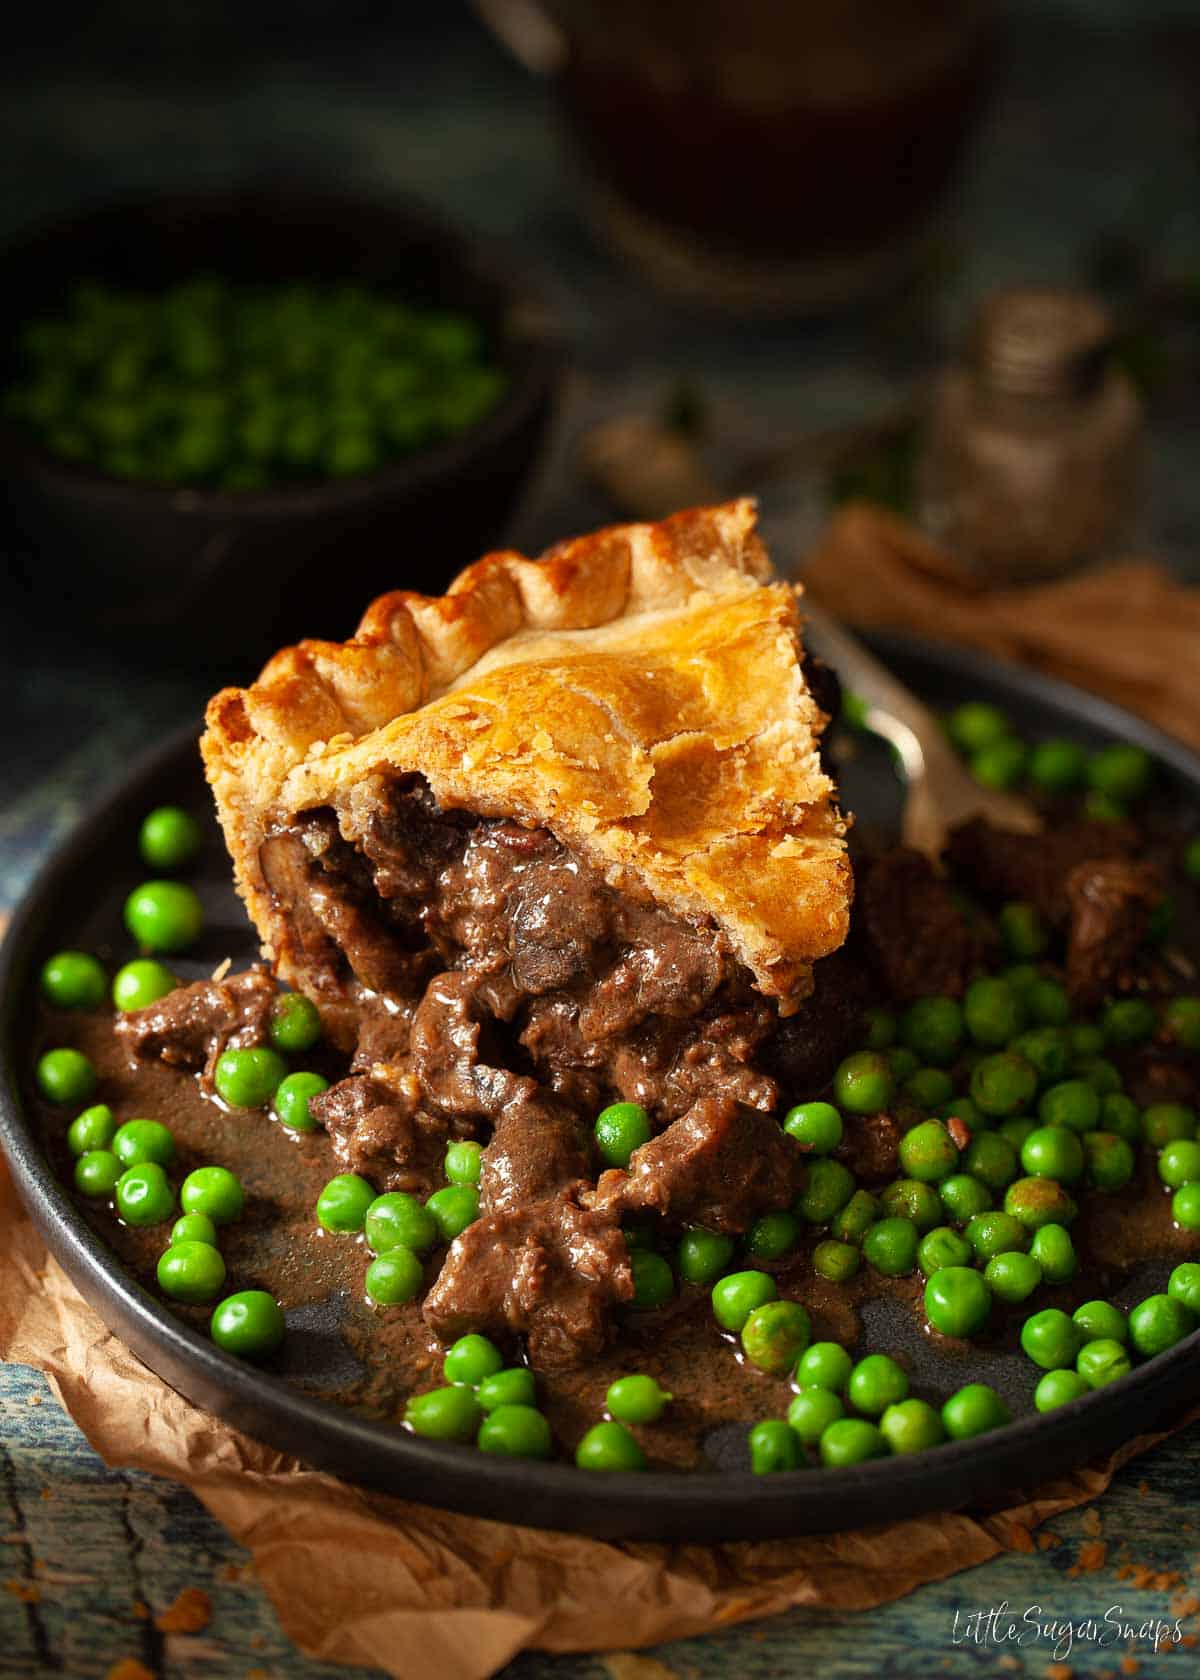 A slice of venison pie on a plate with peas and gravy.